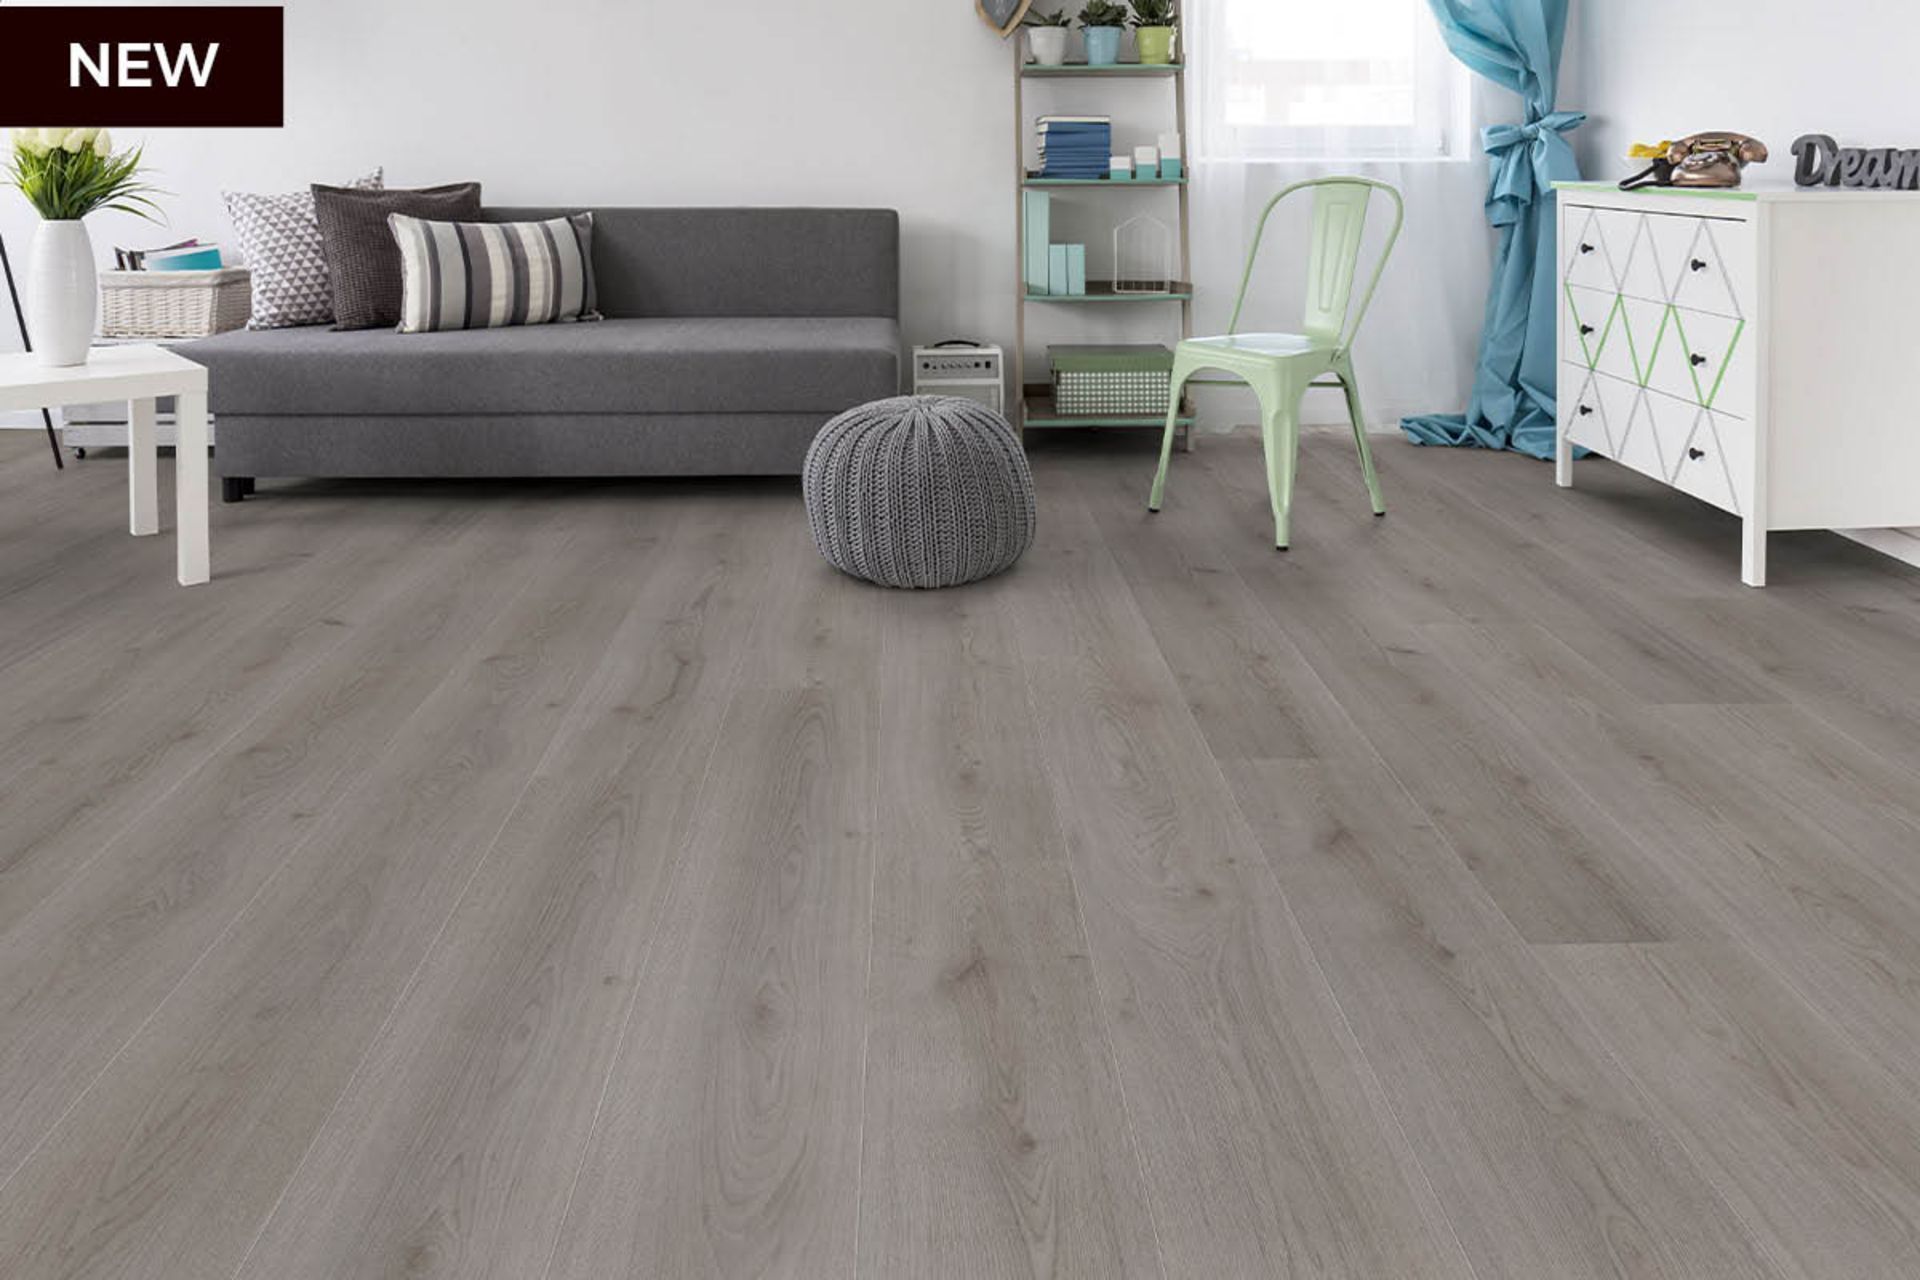 9.54m2 WILD DOVE OAK LAMINATE FLOORING . The elegant mid-grey hue of this floor complements any